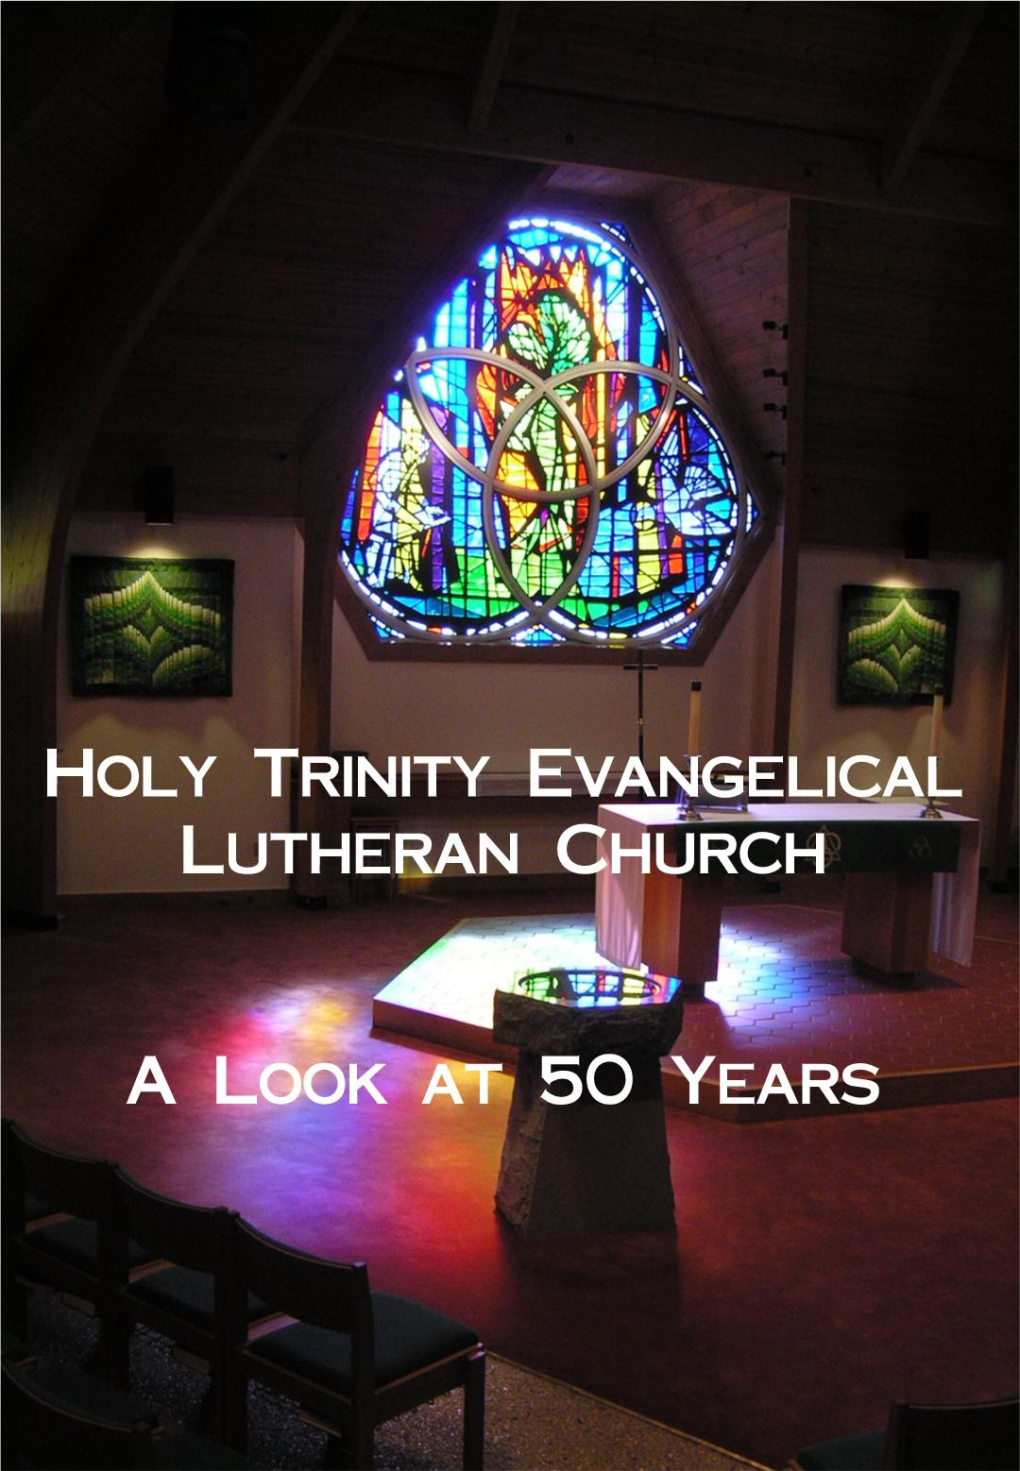 Below Is the Story of How Holy Trinity Lutheran Church Began, Written by Harold Lee